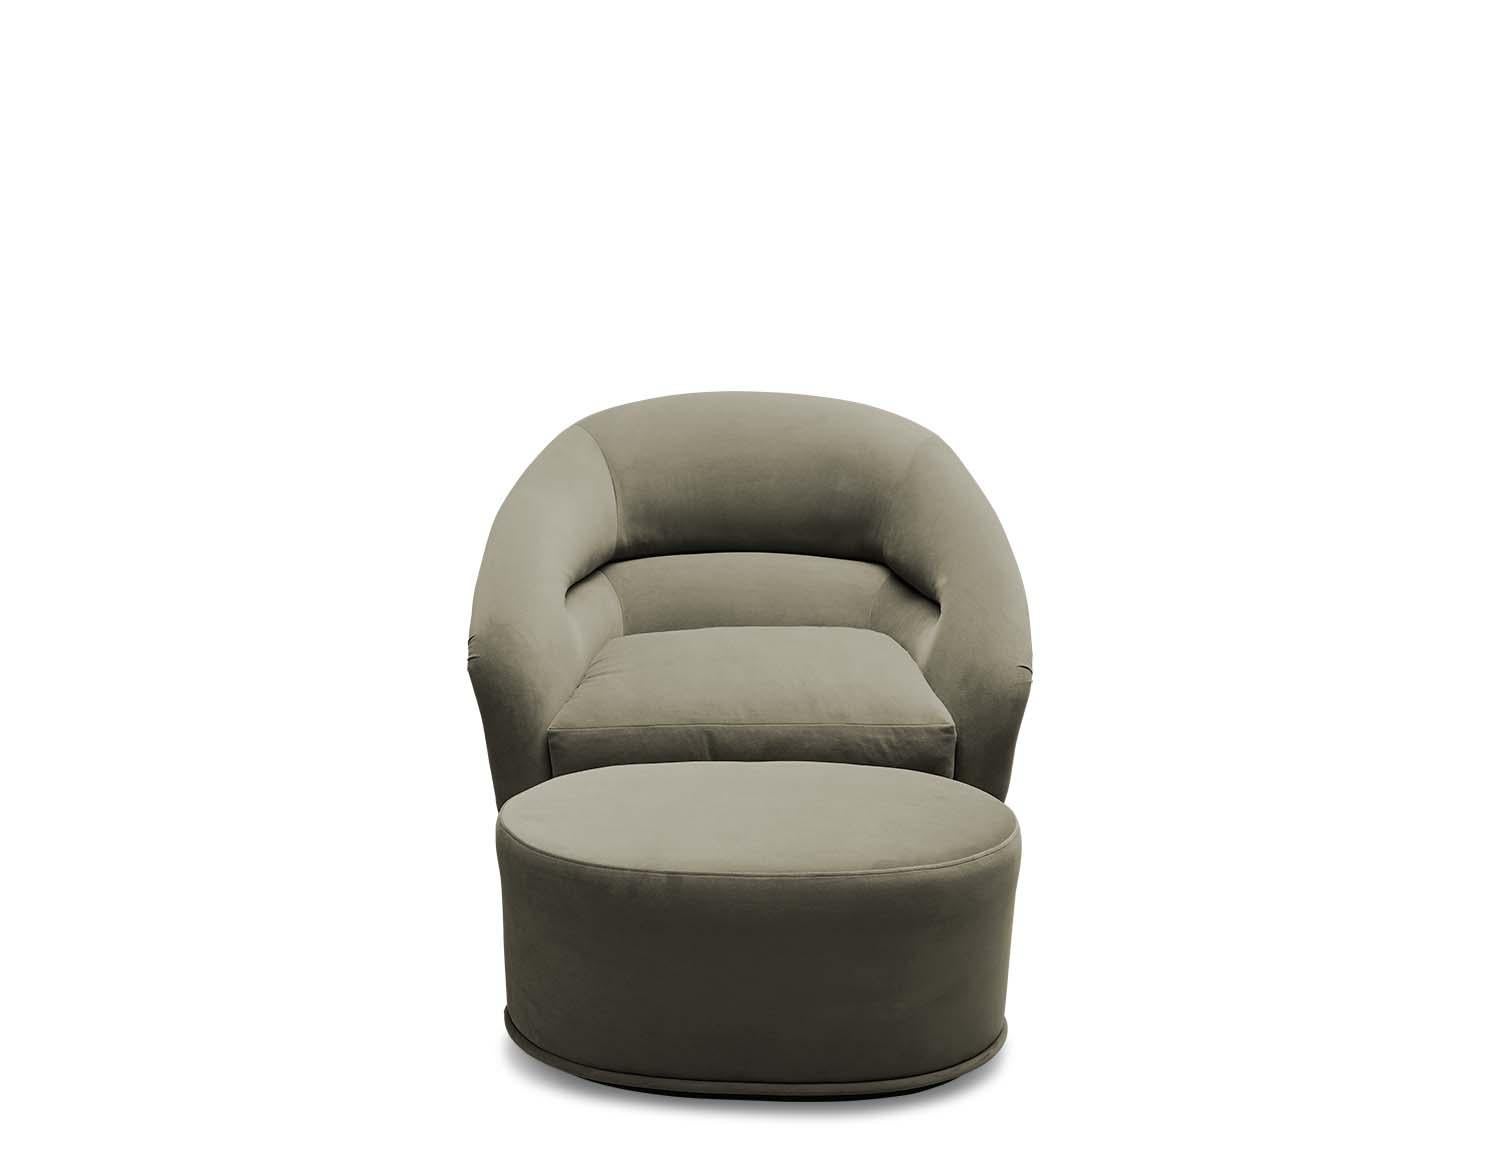 The Huxley swivel chair is inspired by 1970s lounge furniture. A curvaceous form with a single line tuft and long seat cushion rest atop a brass base that swivels.

The Lawson-Fenning Collection is designed and handmade in Los Angeles, California.